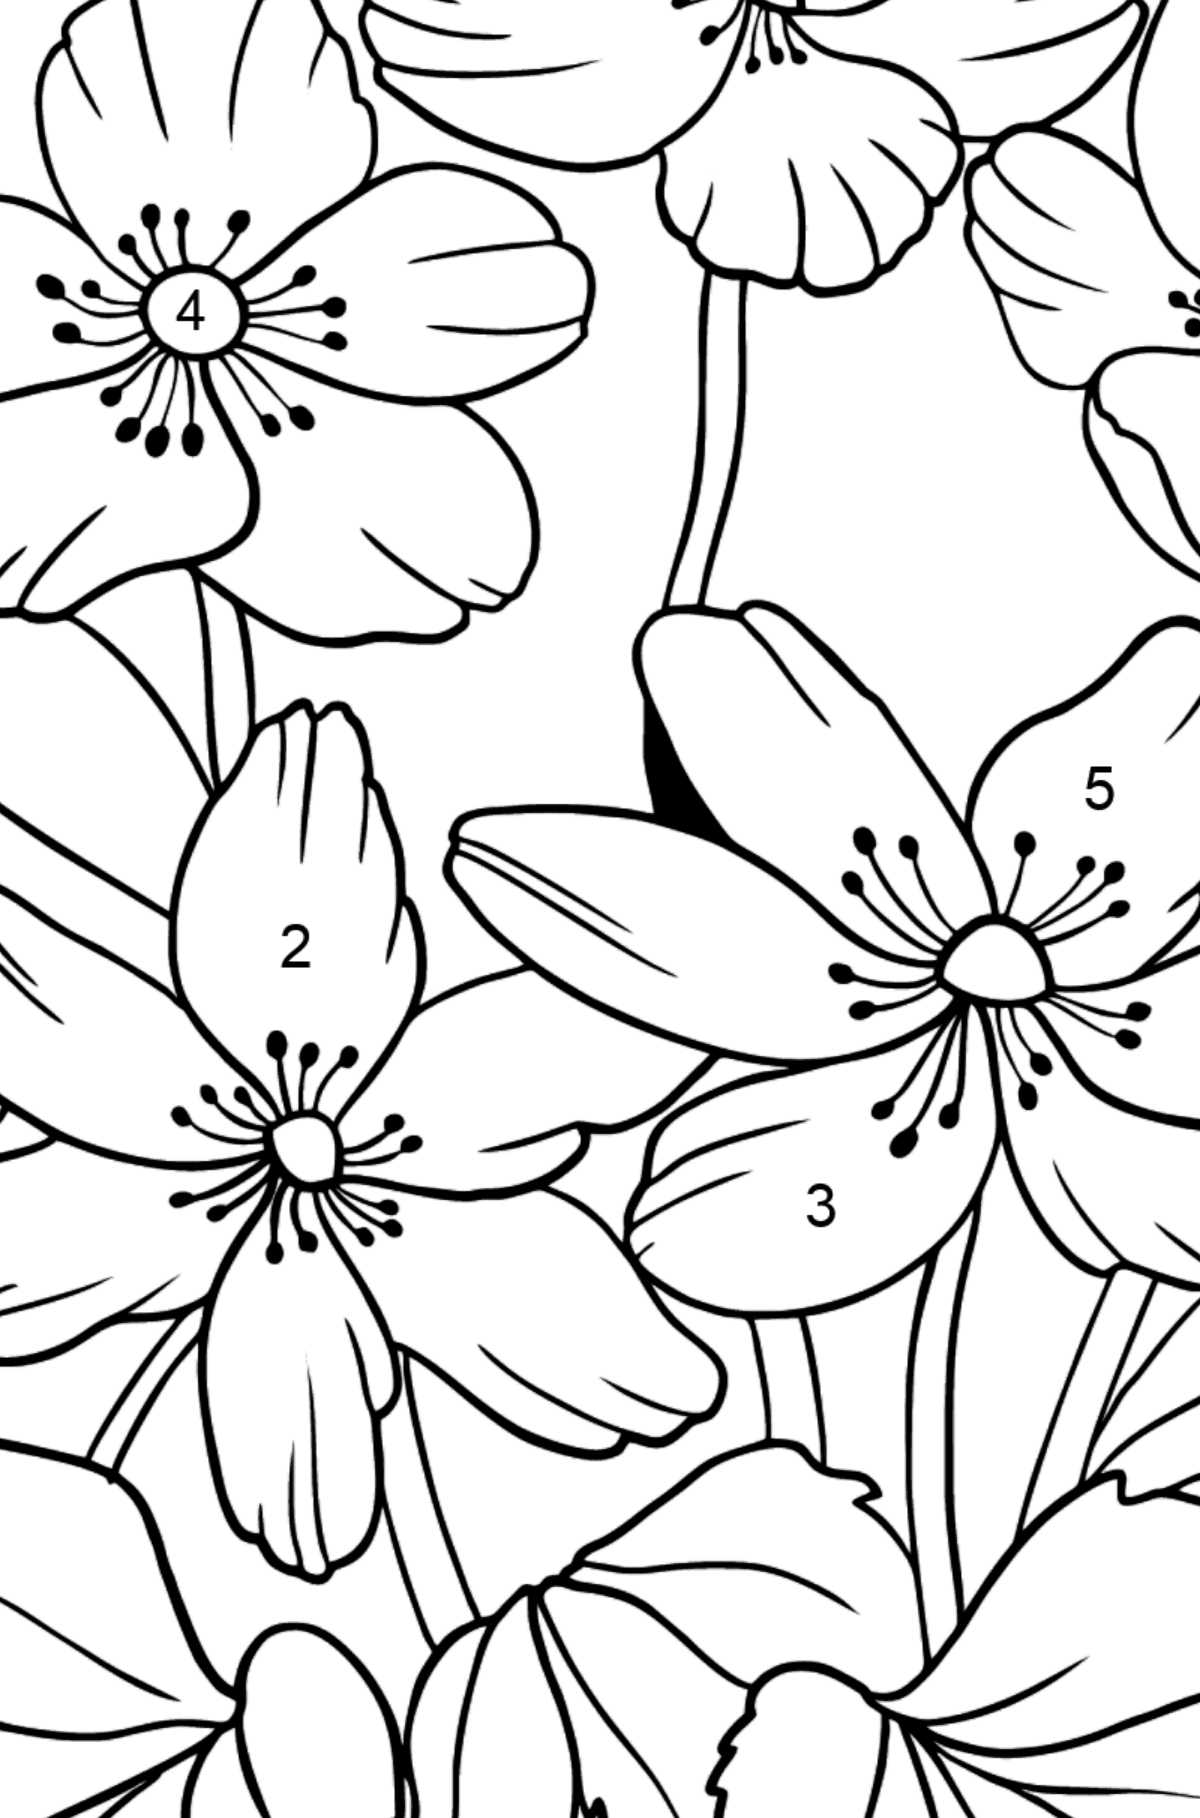 Flower Coloring Page - A Pastel Yellow Windflower - Coloring by Numbers for Kids